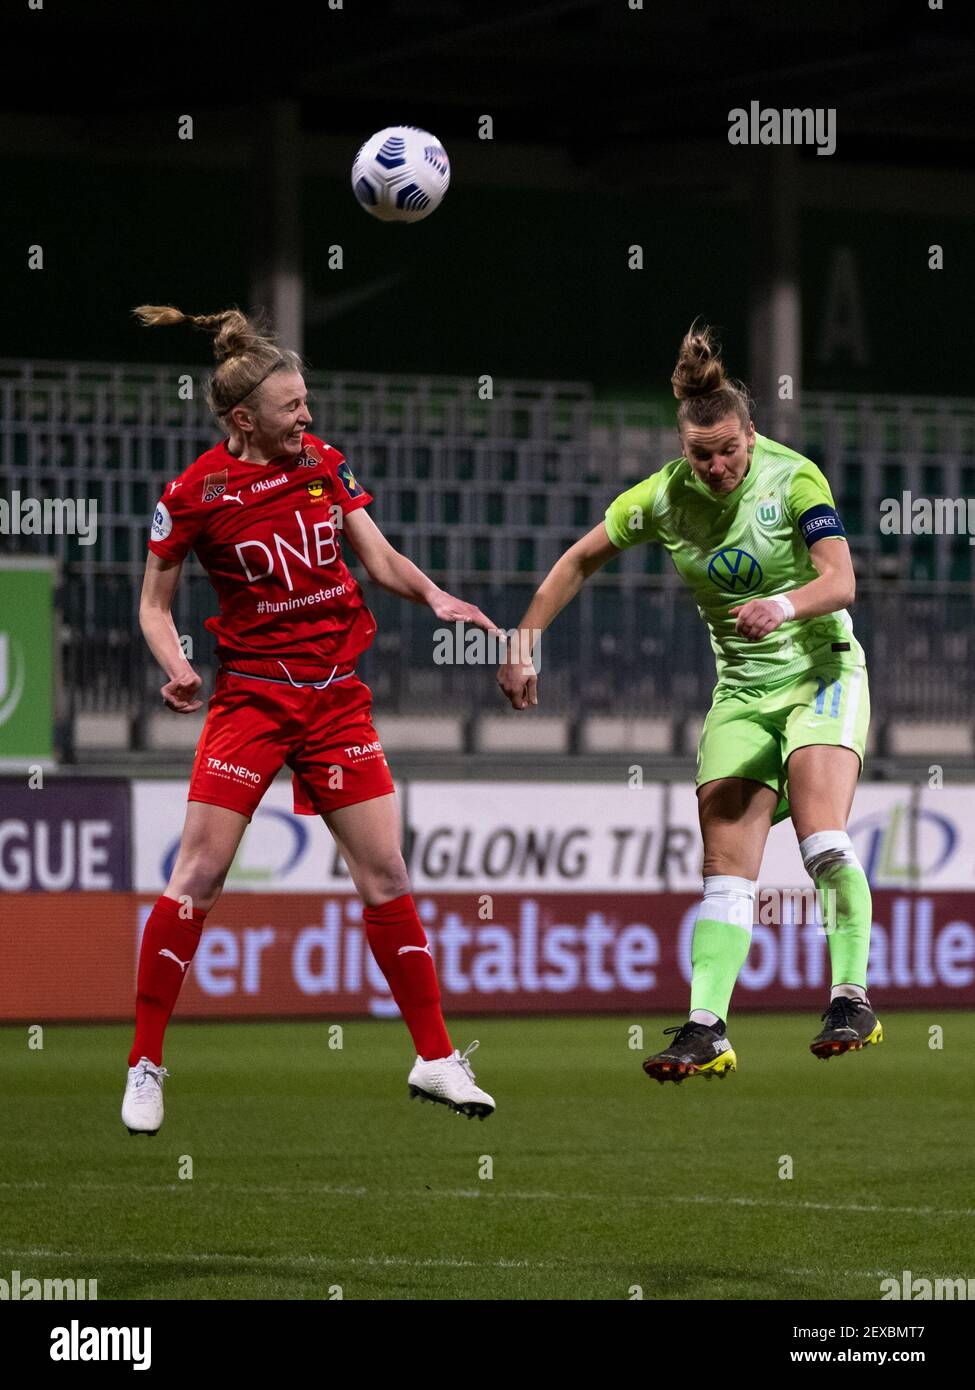 Alex Popp (#11 VfL Wolfsburg) and Ina Gausdal (#5 LSK Kvinner) go for a header during the match in the Uefa Women's Champions League round of 16 between VfL Wolfsburg and LSK Kvinner at AOK Stadion in Wolfsburg Stock Photo